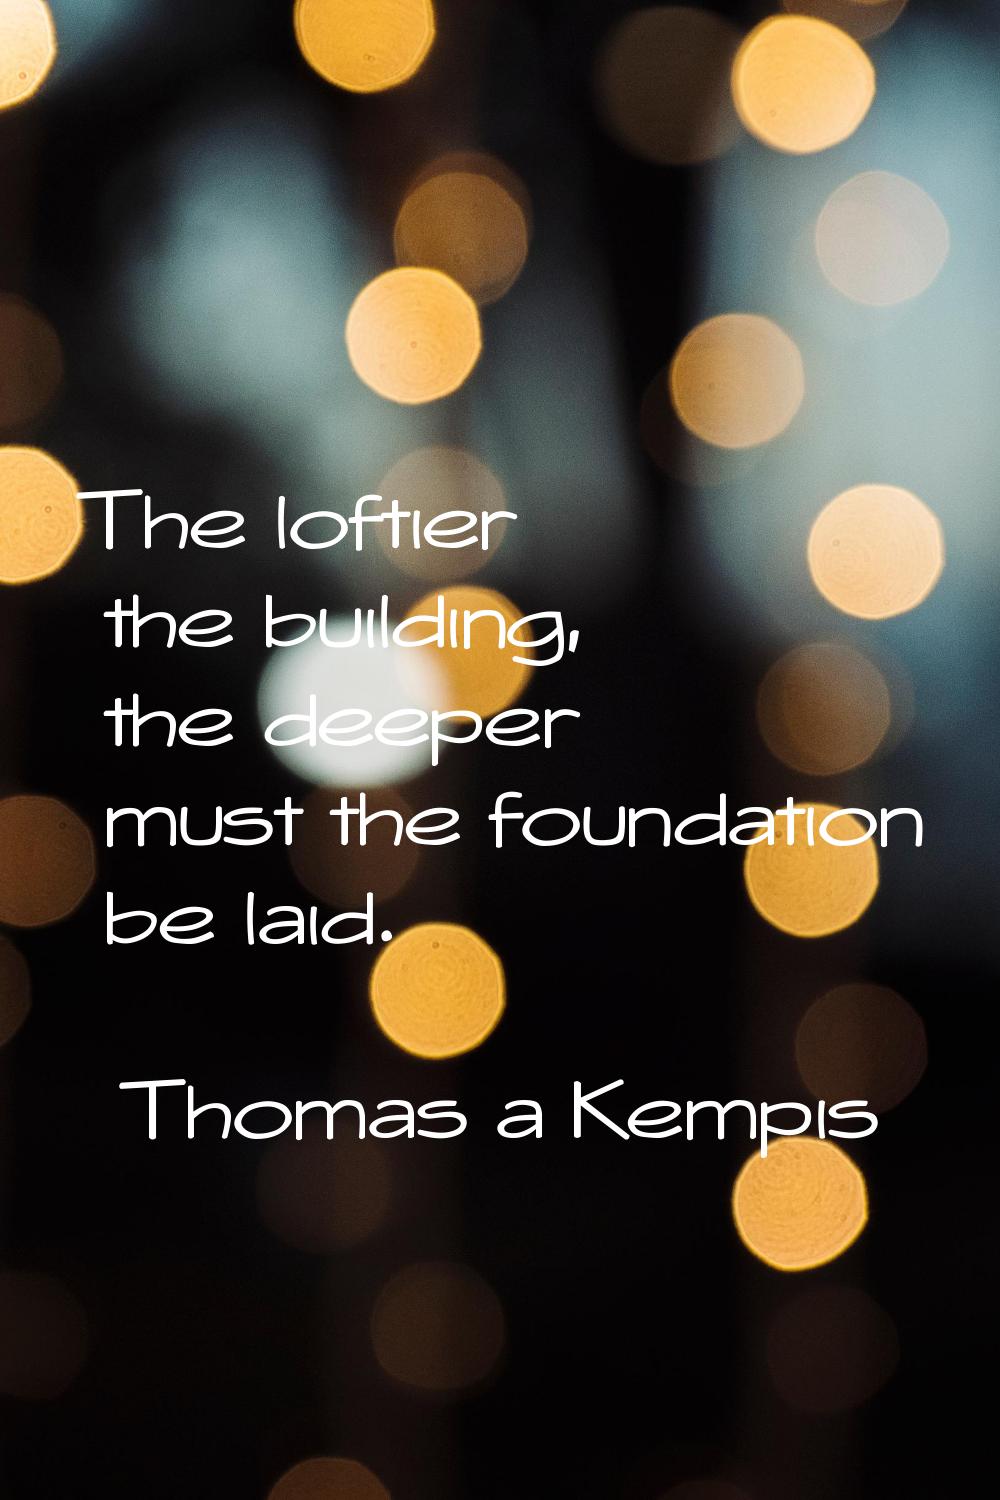 The loftier the building, the deeper must the foundation be laid.